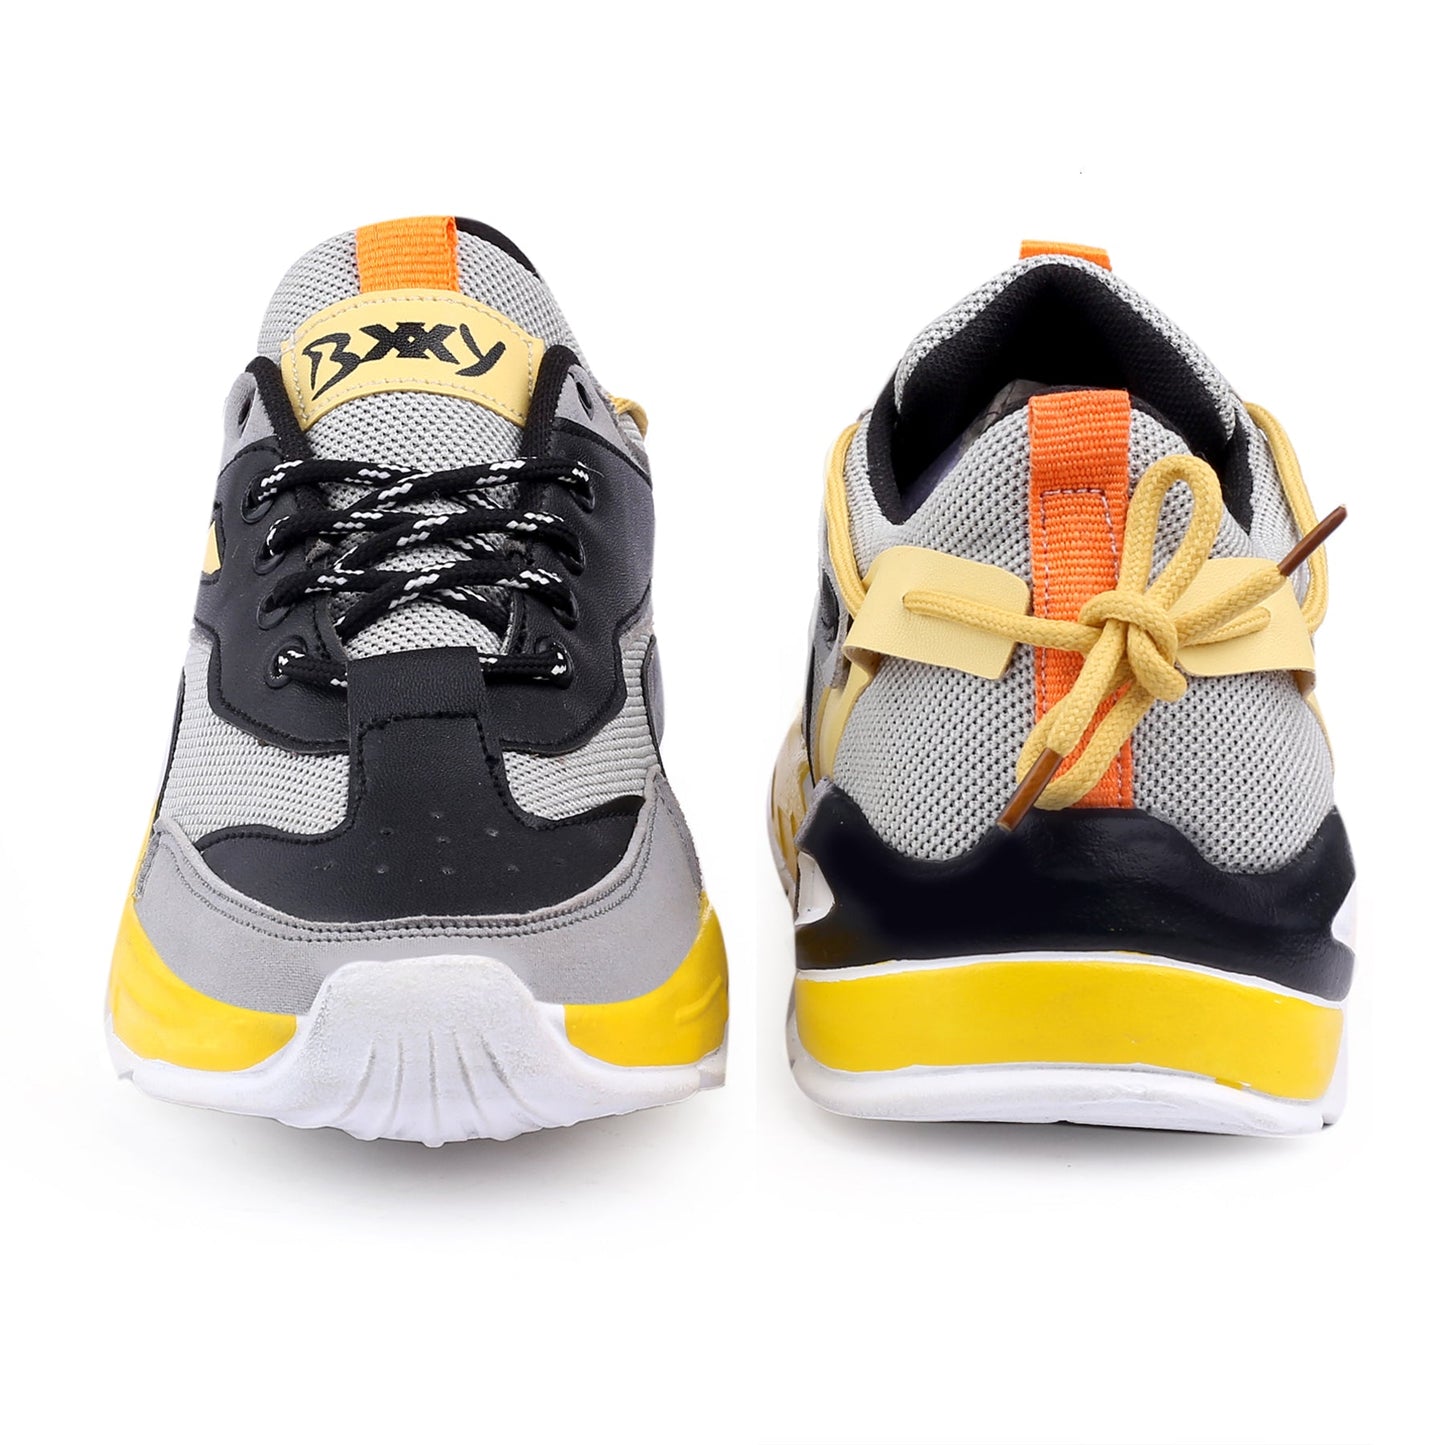 Bxxy Men's Latest Casual Sneakers And Sports Lace-Up Stylish Shoe